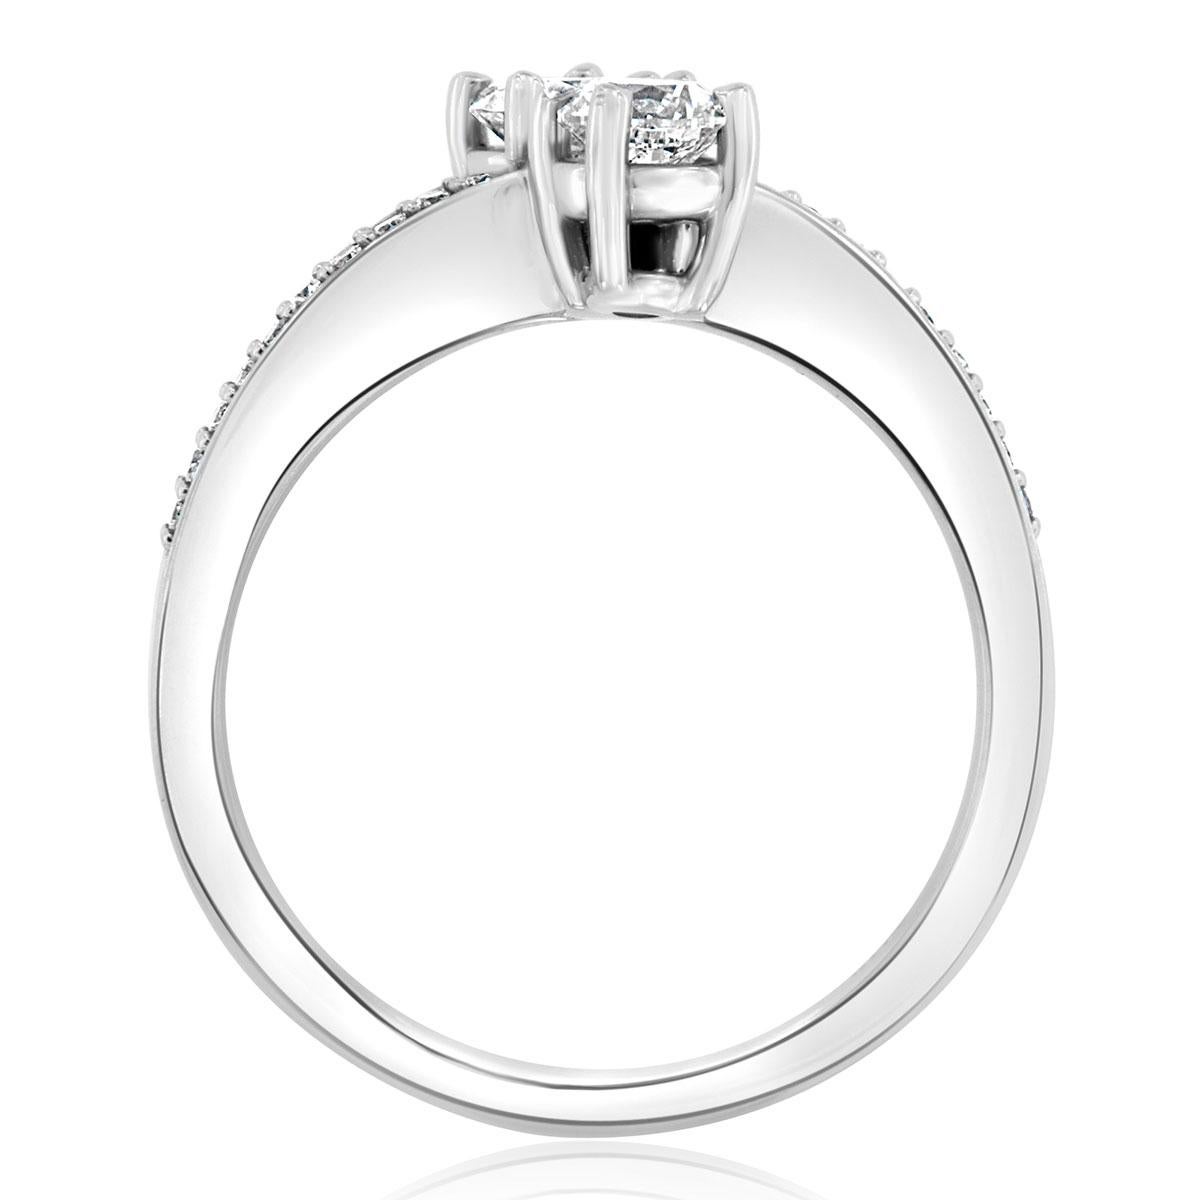 This elegant ring features two perfectly matched 1/3 of a carat each round brilliant diamonds four prongs set on each side of a wavey band. A row of 25 round melee diamonds is micro-prong set on top of the band separating the two larger diamonds.